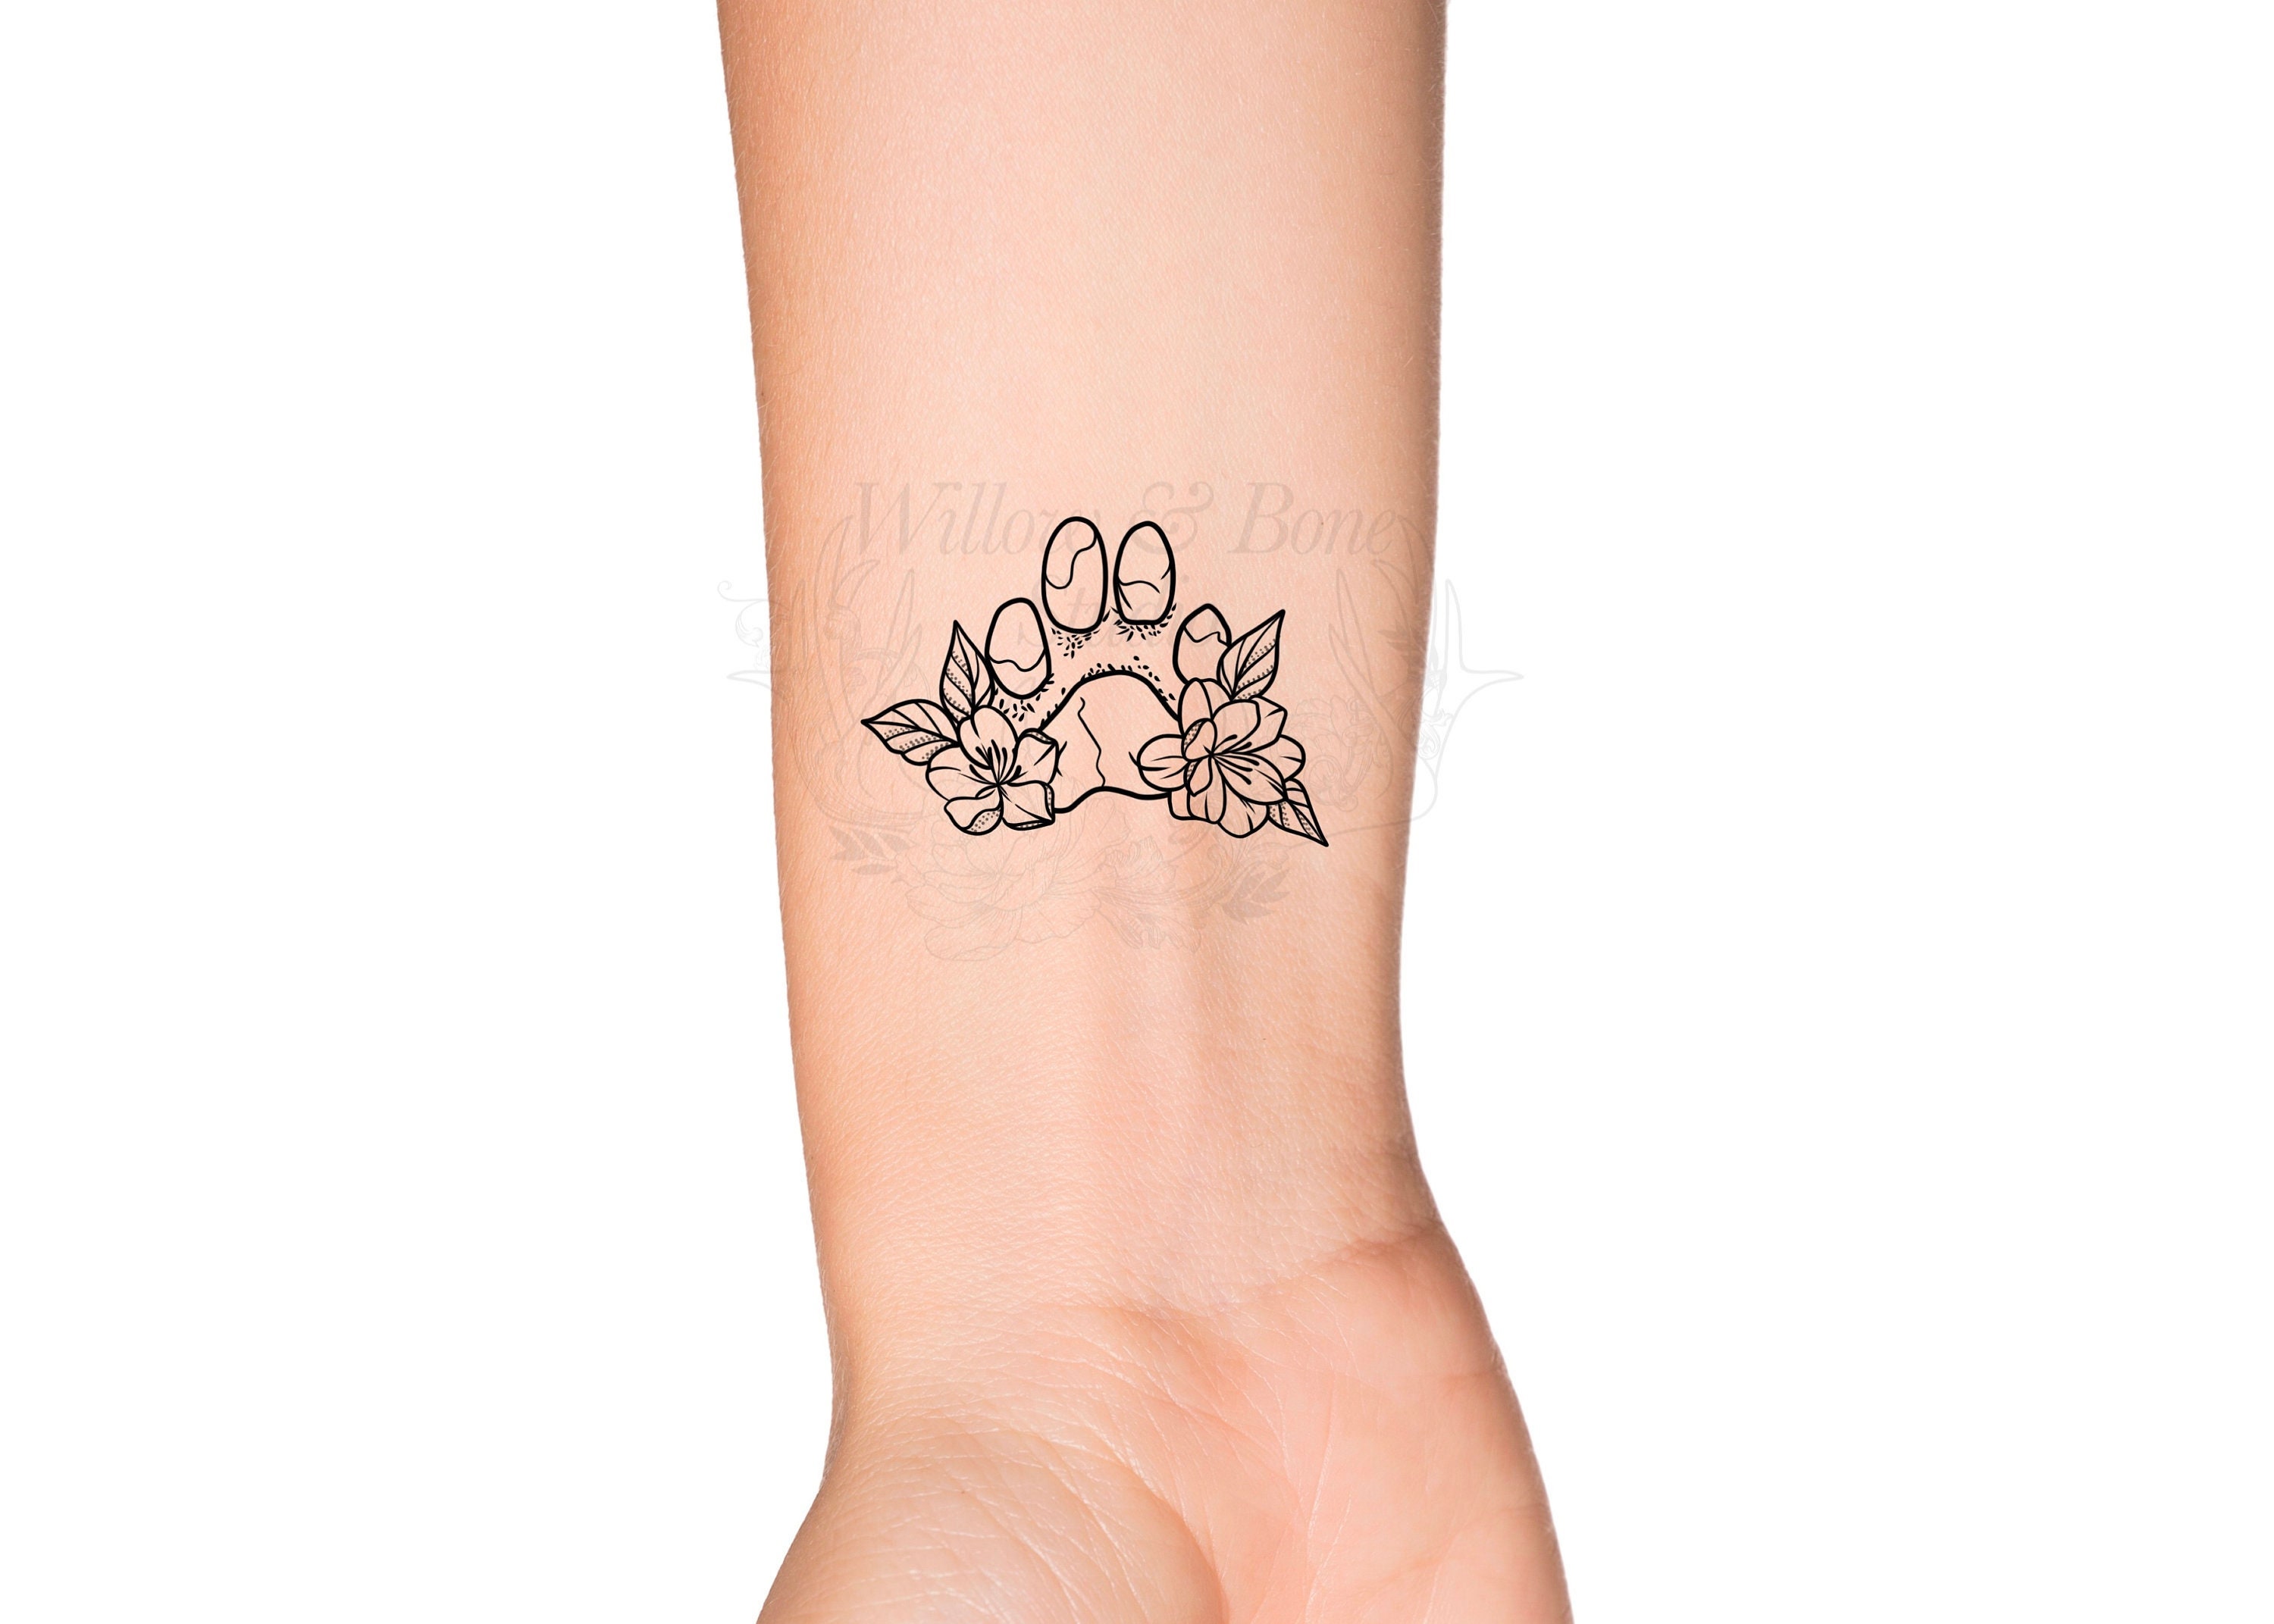 36 Unique Paw Tattoos for Ankle  Tattoo Designs  TattoosBagcom